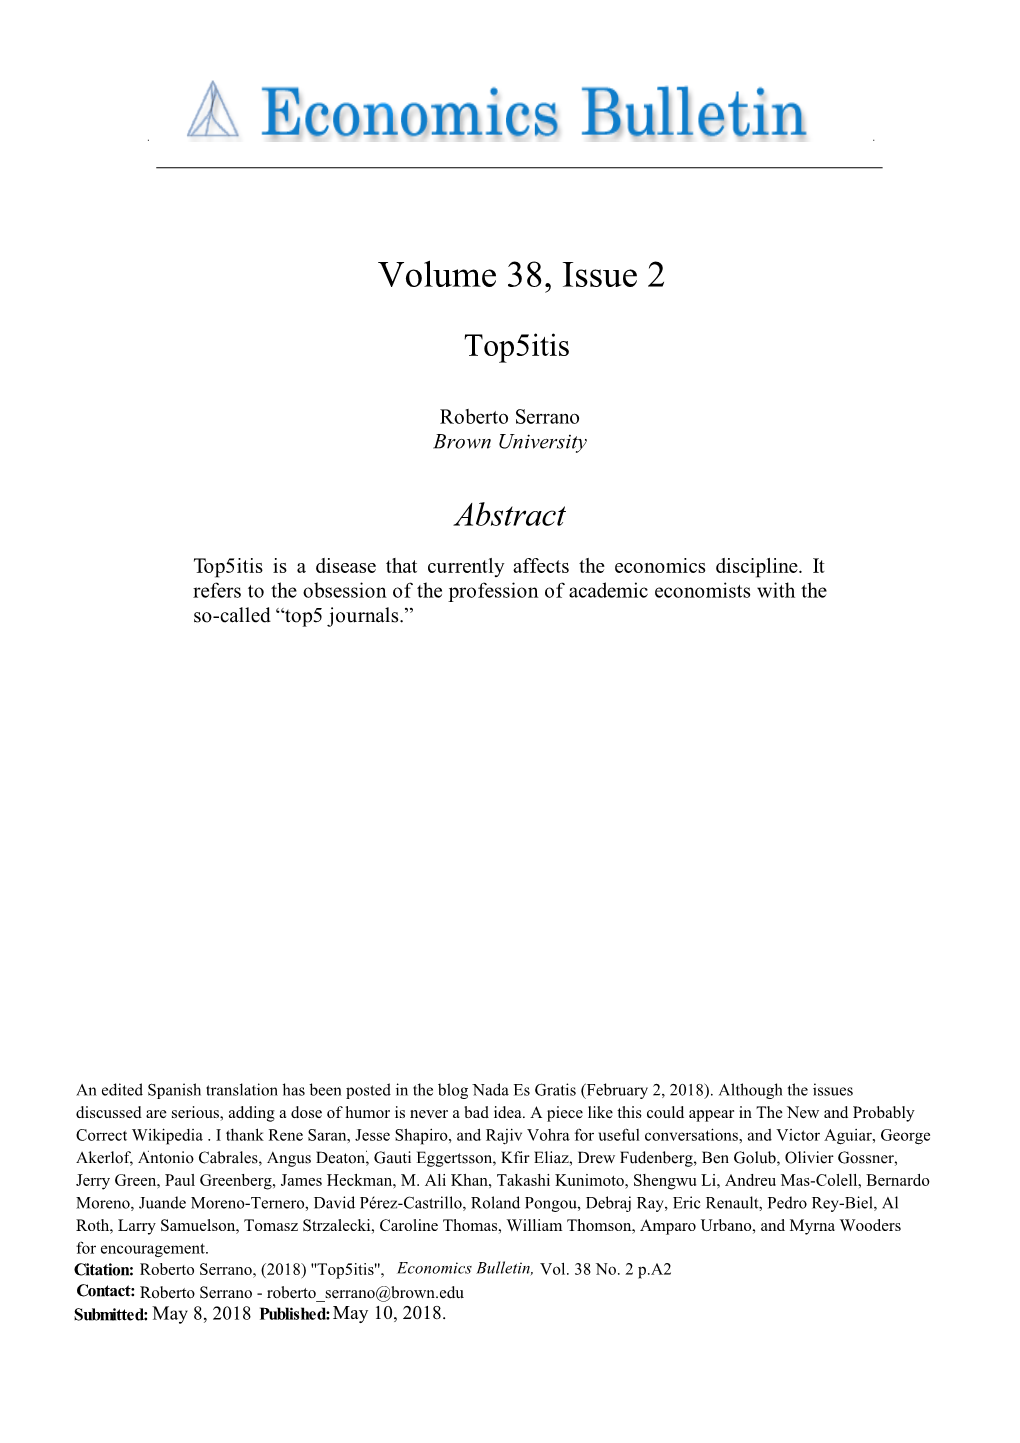 Volume 38, Issue 2 Abstract